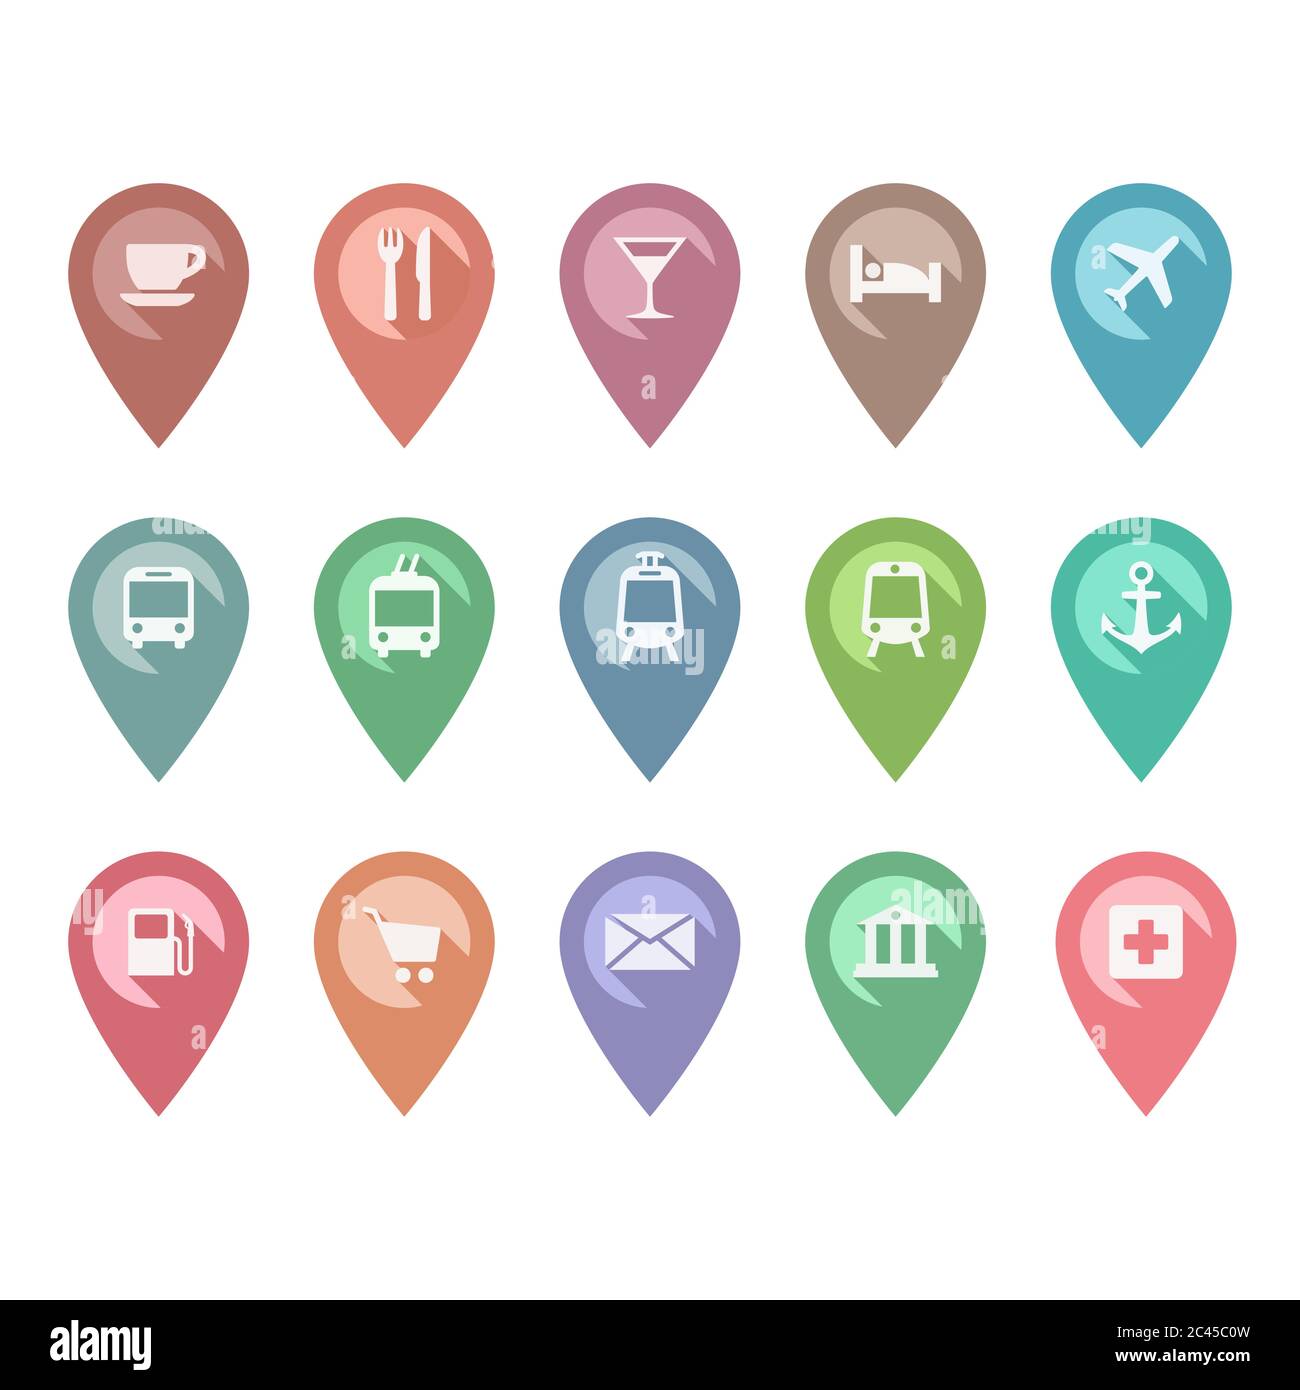 Location pin pointer vector set with cafe, restaurant, hotel, bus icons. Location pin markers with airport, train station, bank, hospital signs. Stock Vector